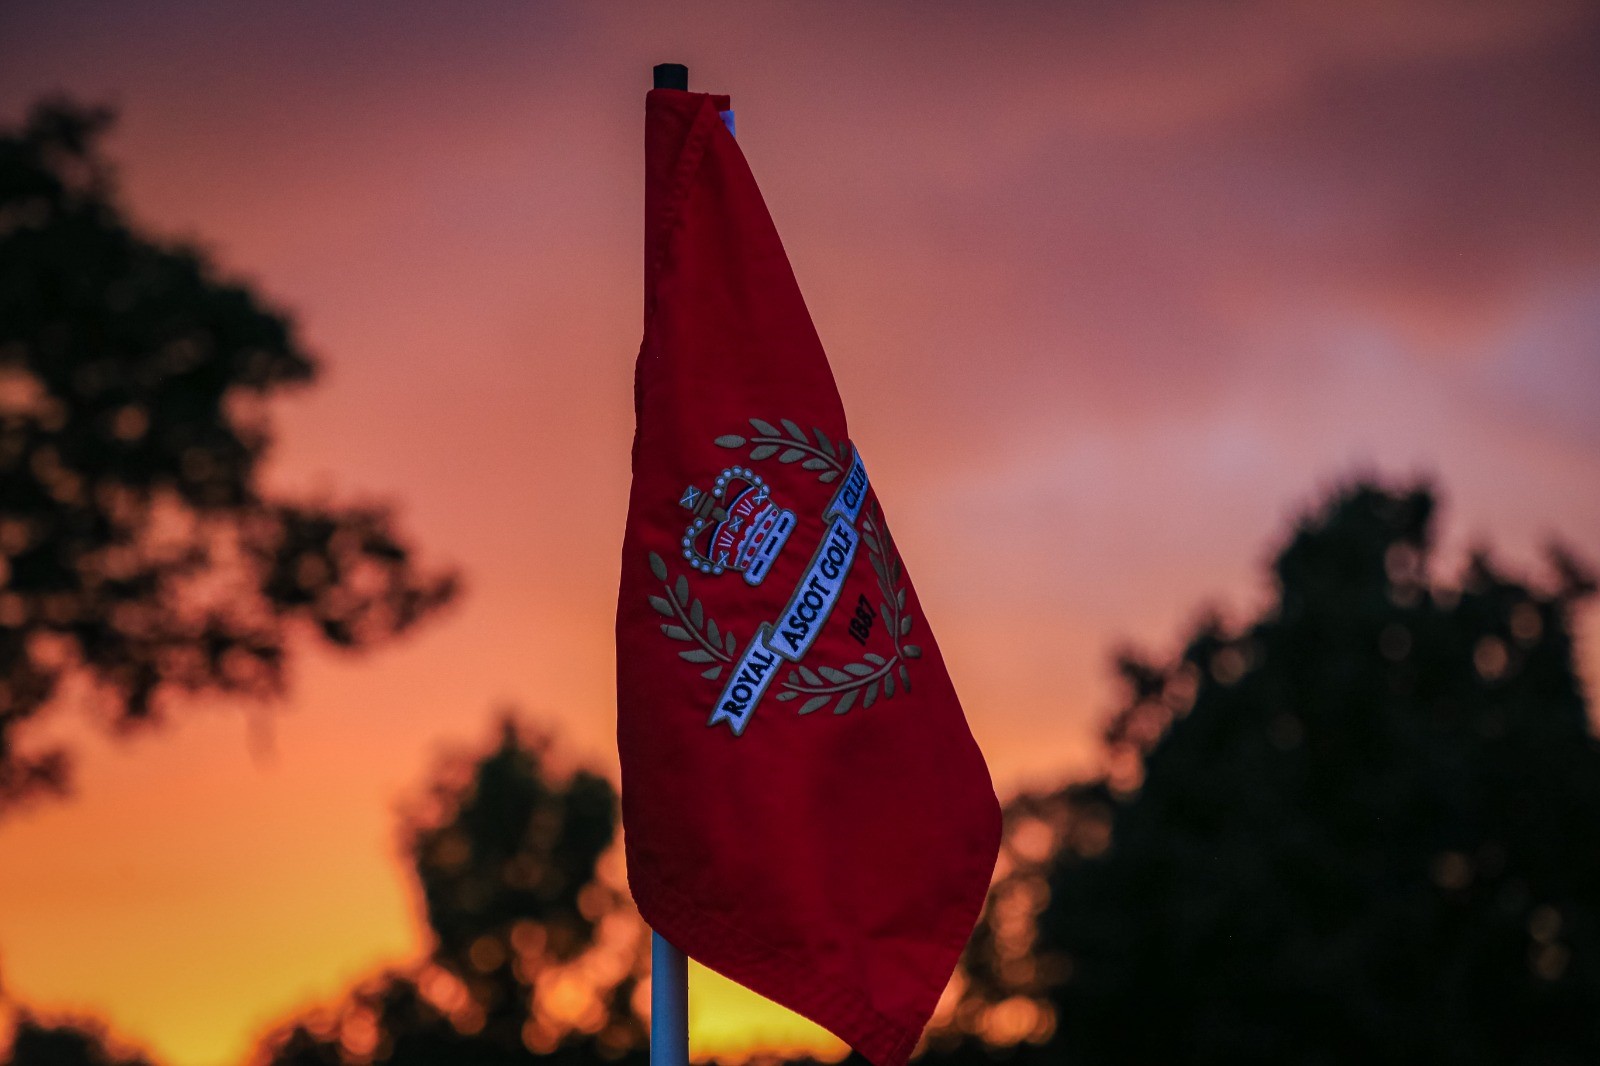 A red flag with the Royal Ascot Golf Club logo.